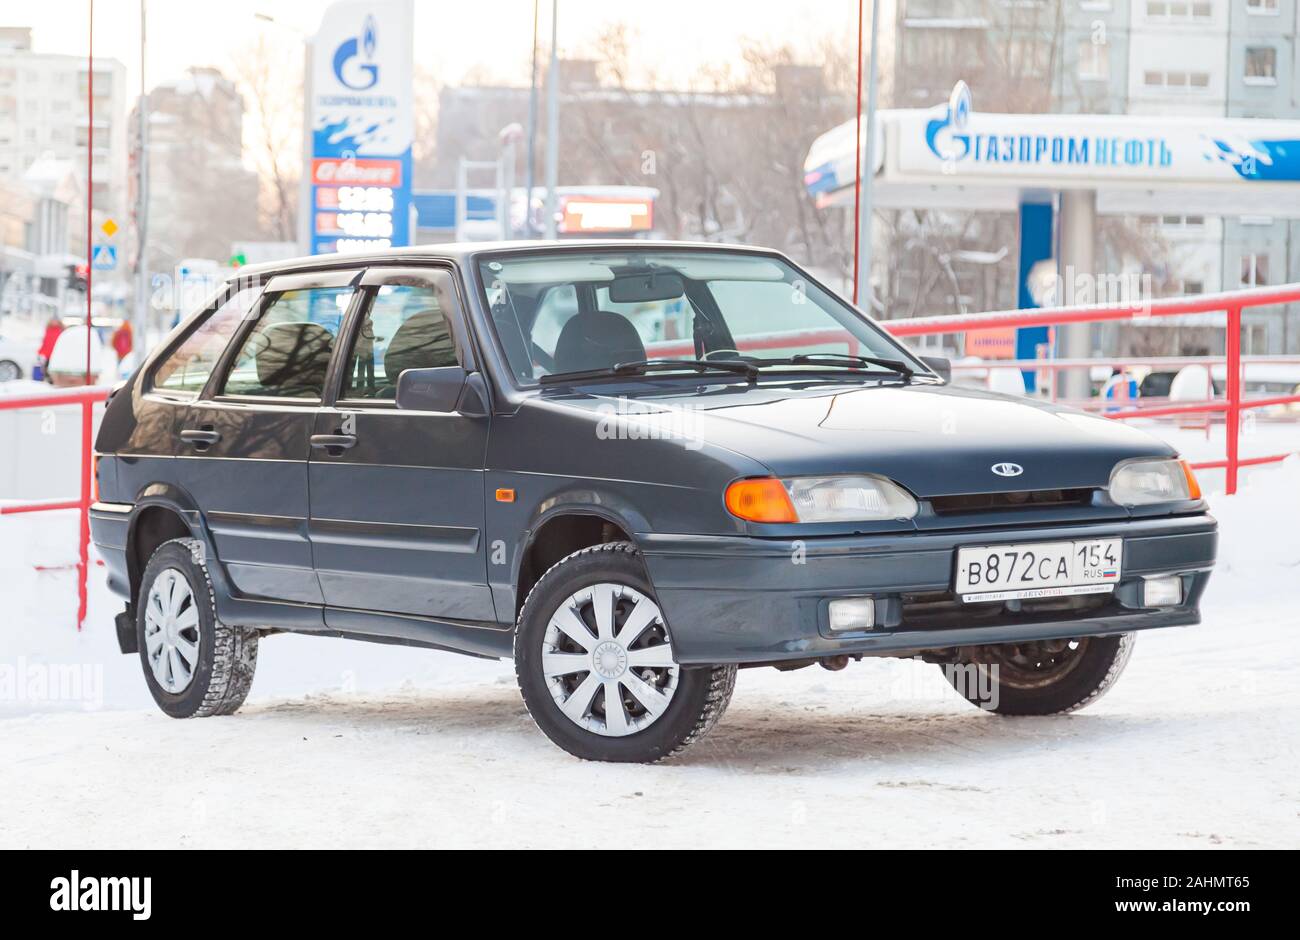 Novosibirsk, Russia - 12.27.2019: Green lada 2114 year front view with dark gray interior in excellent condition in a parking space among other cars Stock Photo